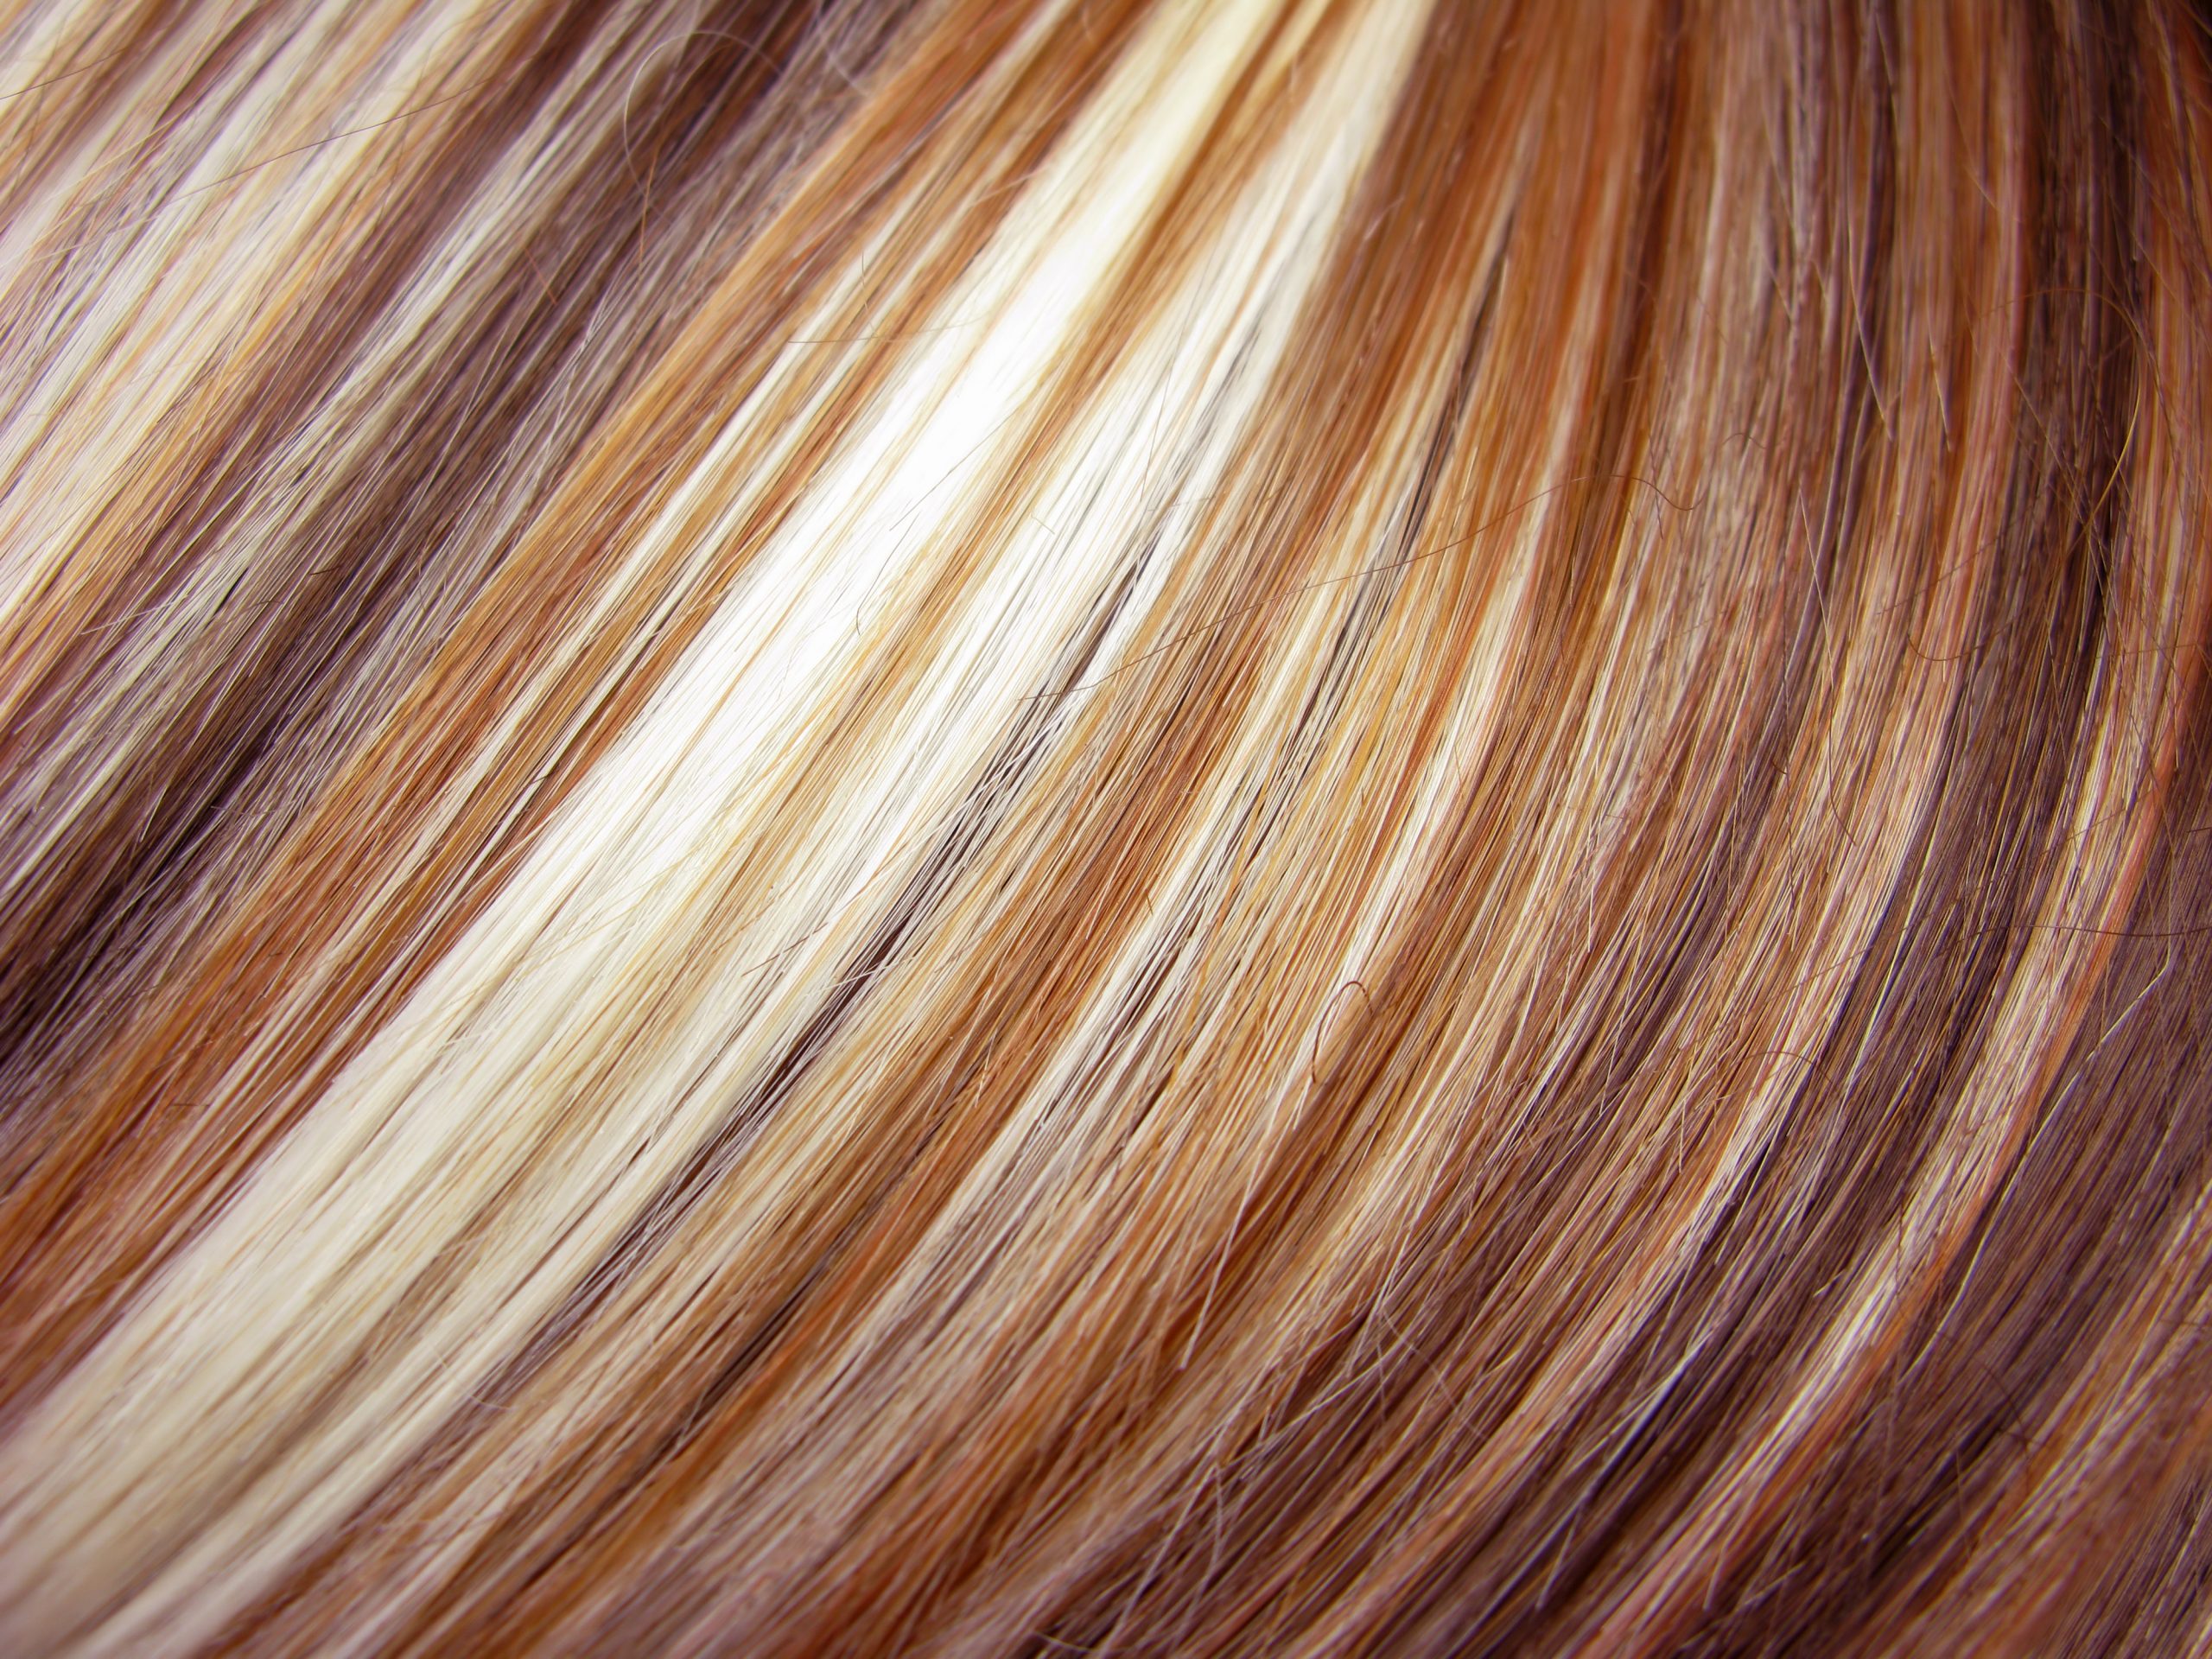 An image of many colors of hair possible at a Colton hair color salon